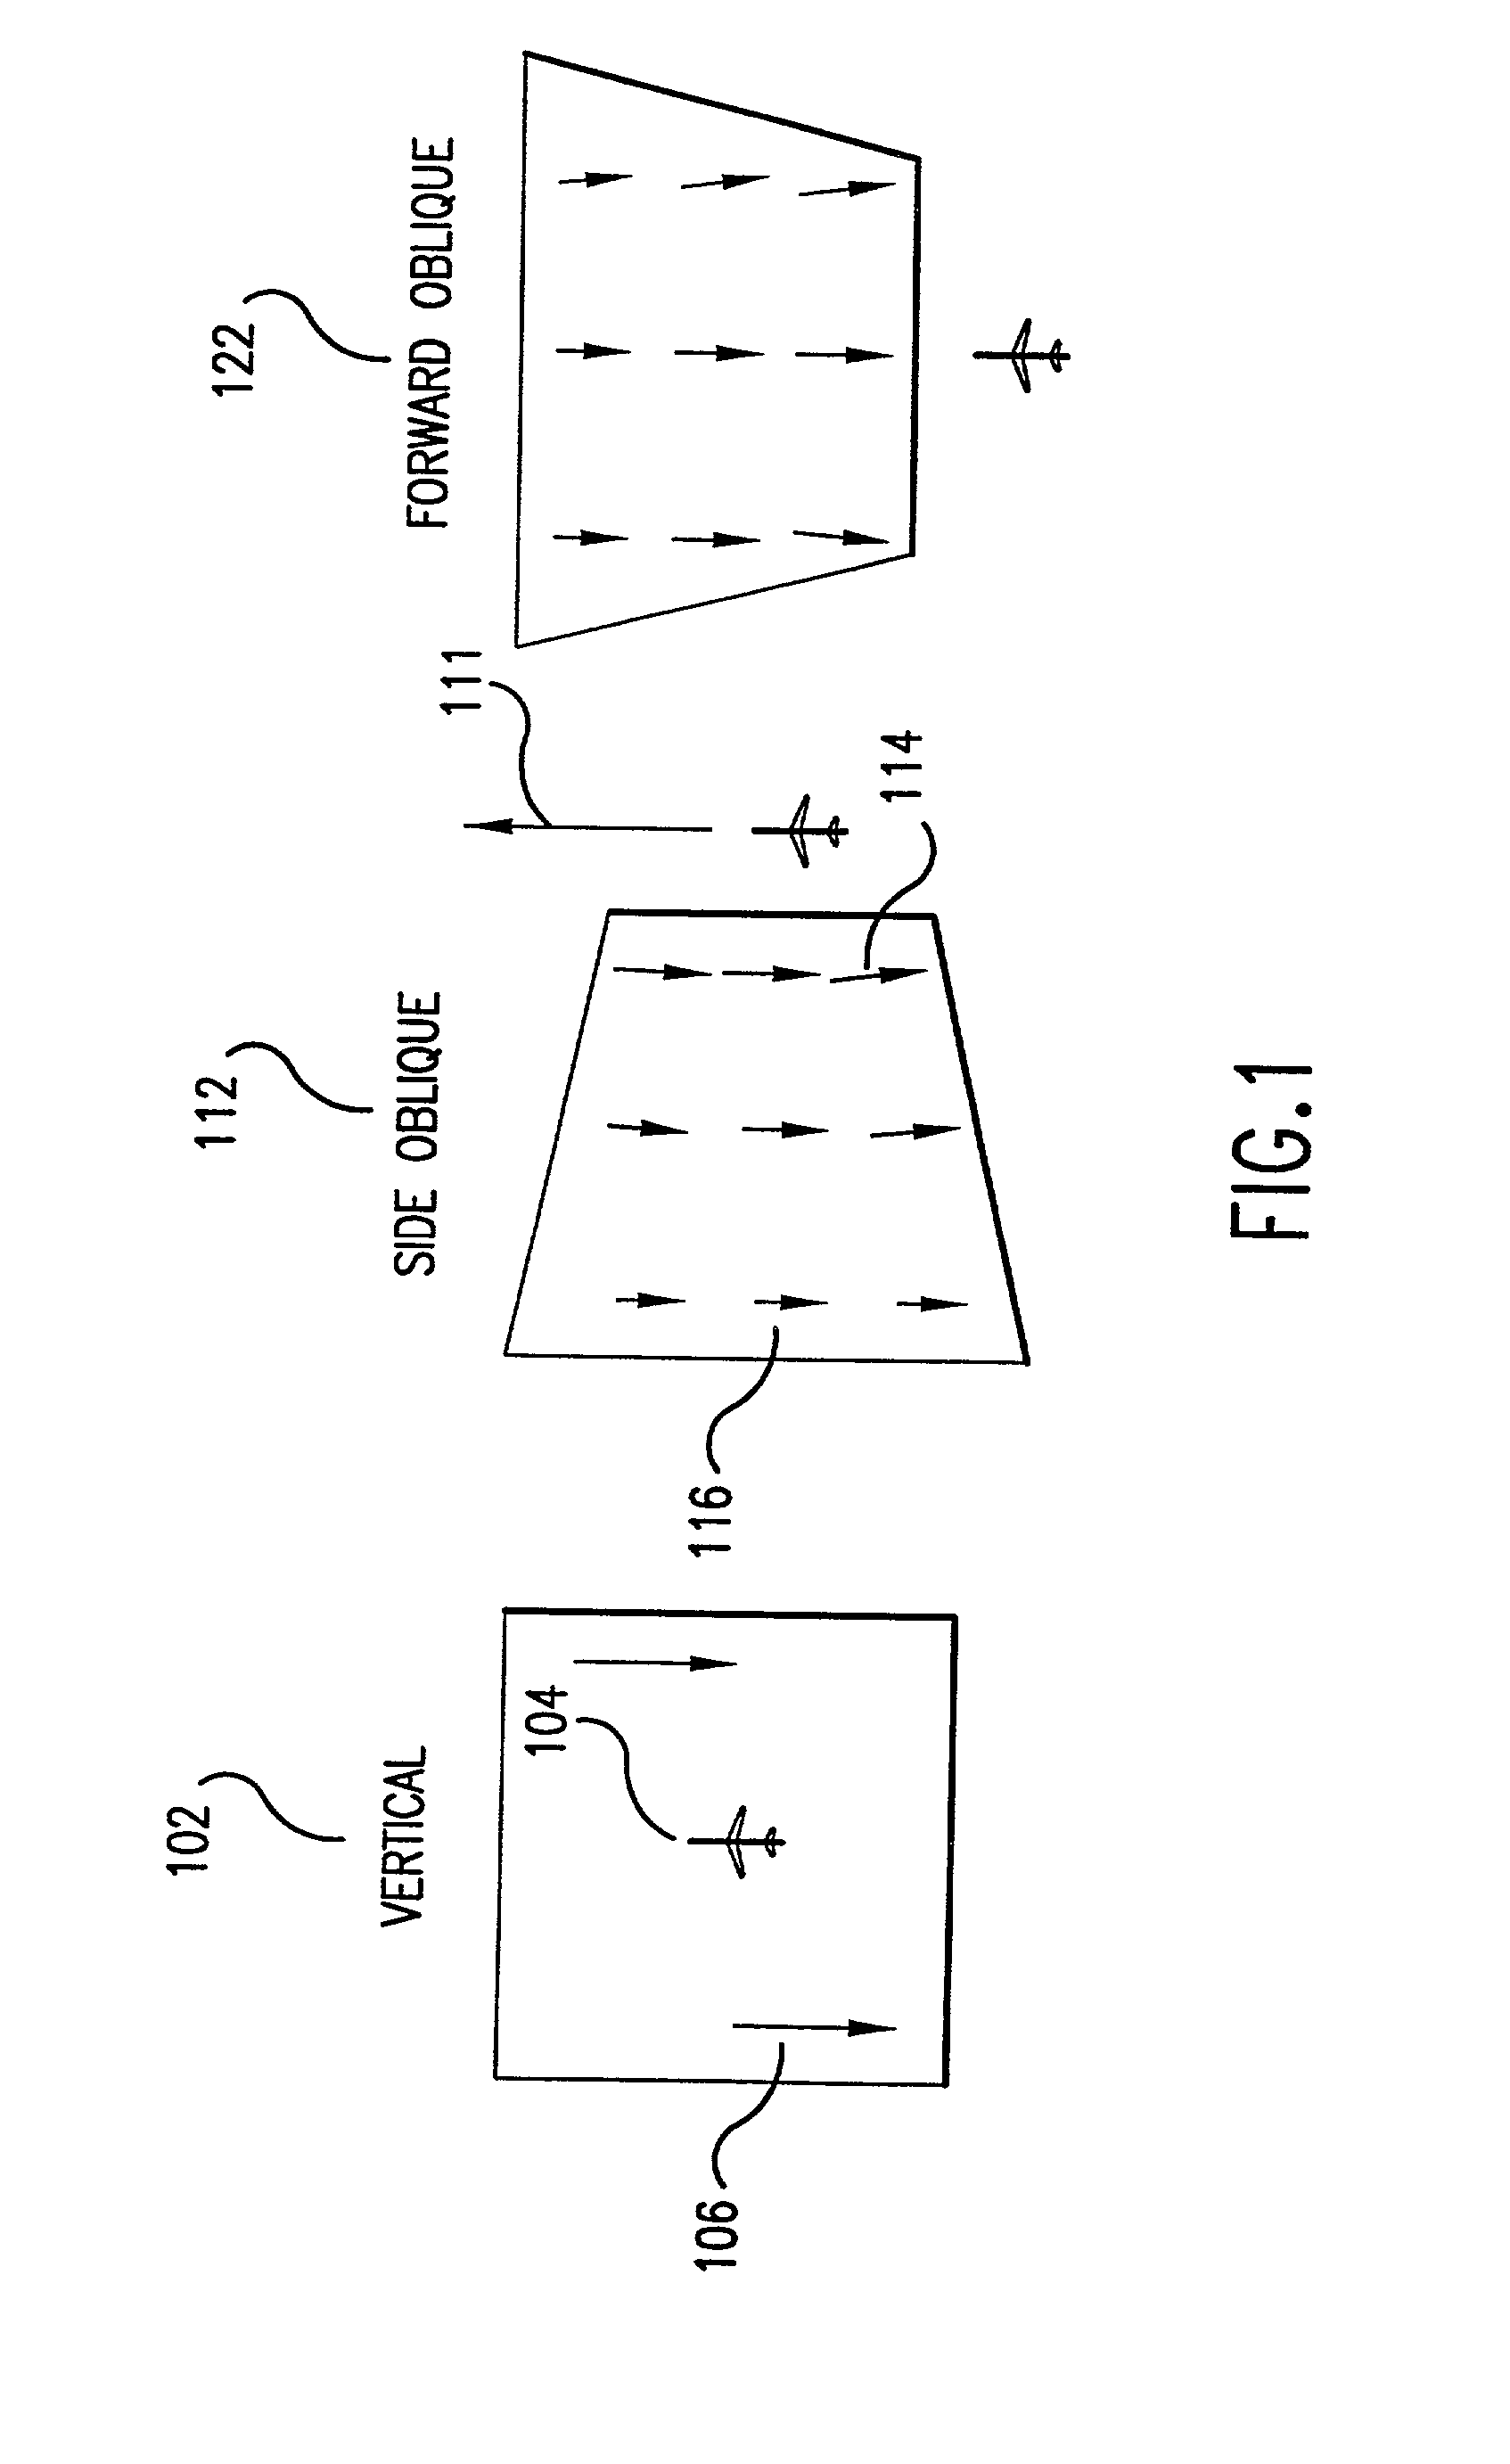 Electro-optical reconnaissance system with forward motion compensation